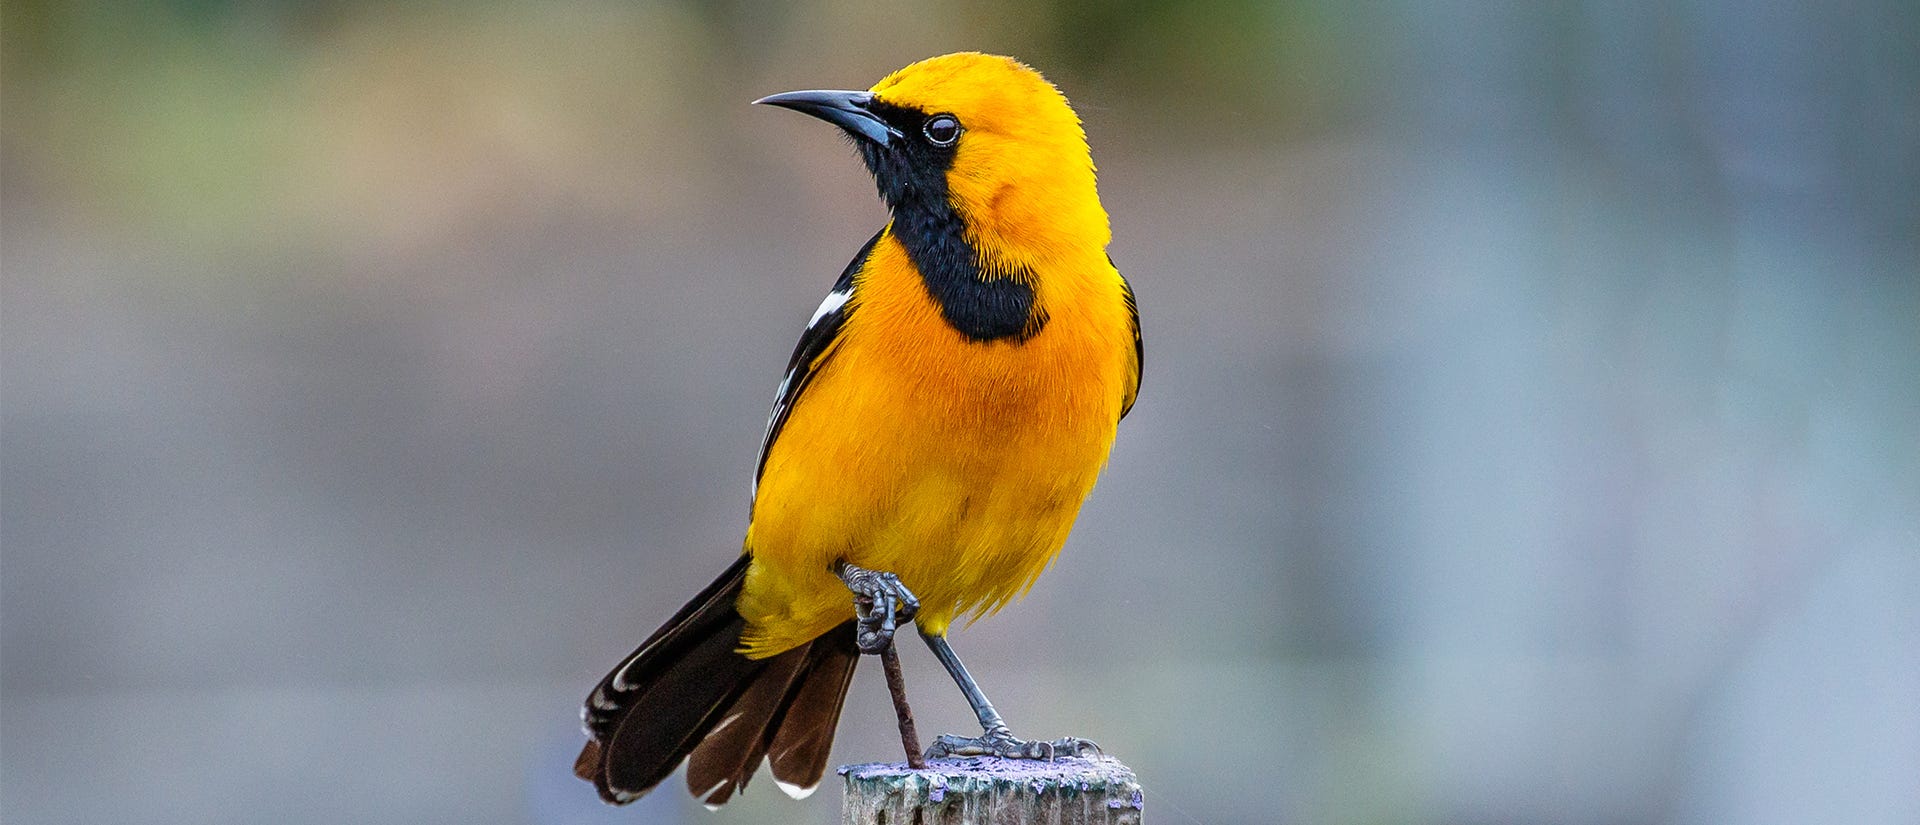 Hooded Oriole on a wooden post